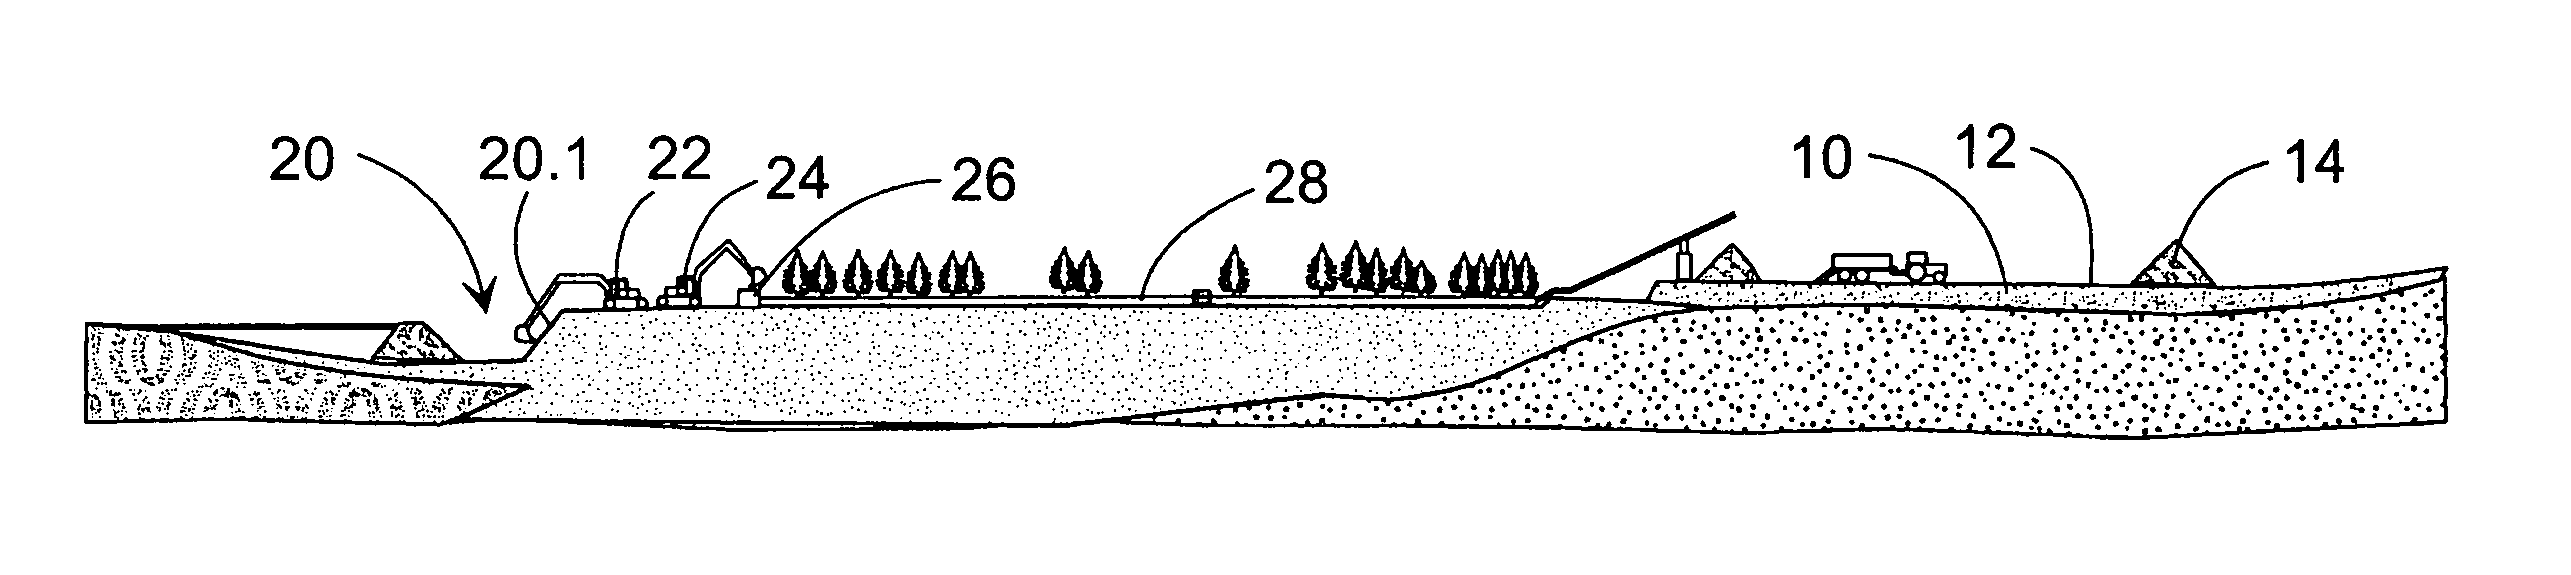 Method and equipment for producing horticultural and fuel peat and a fuel peat product